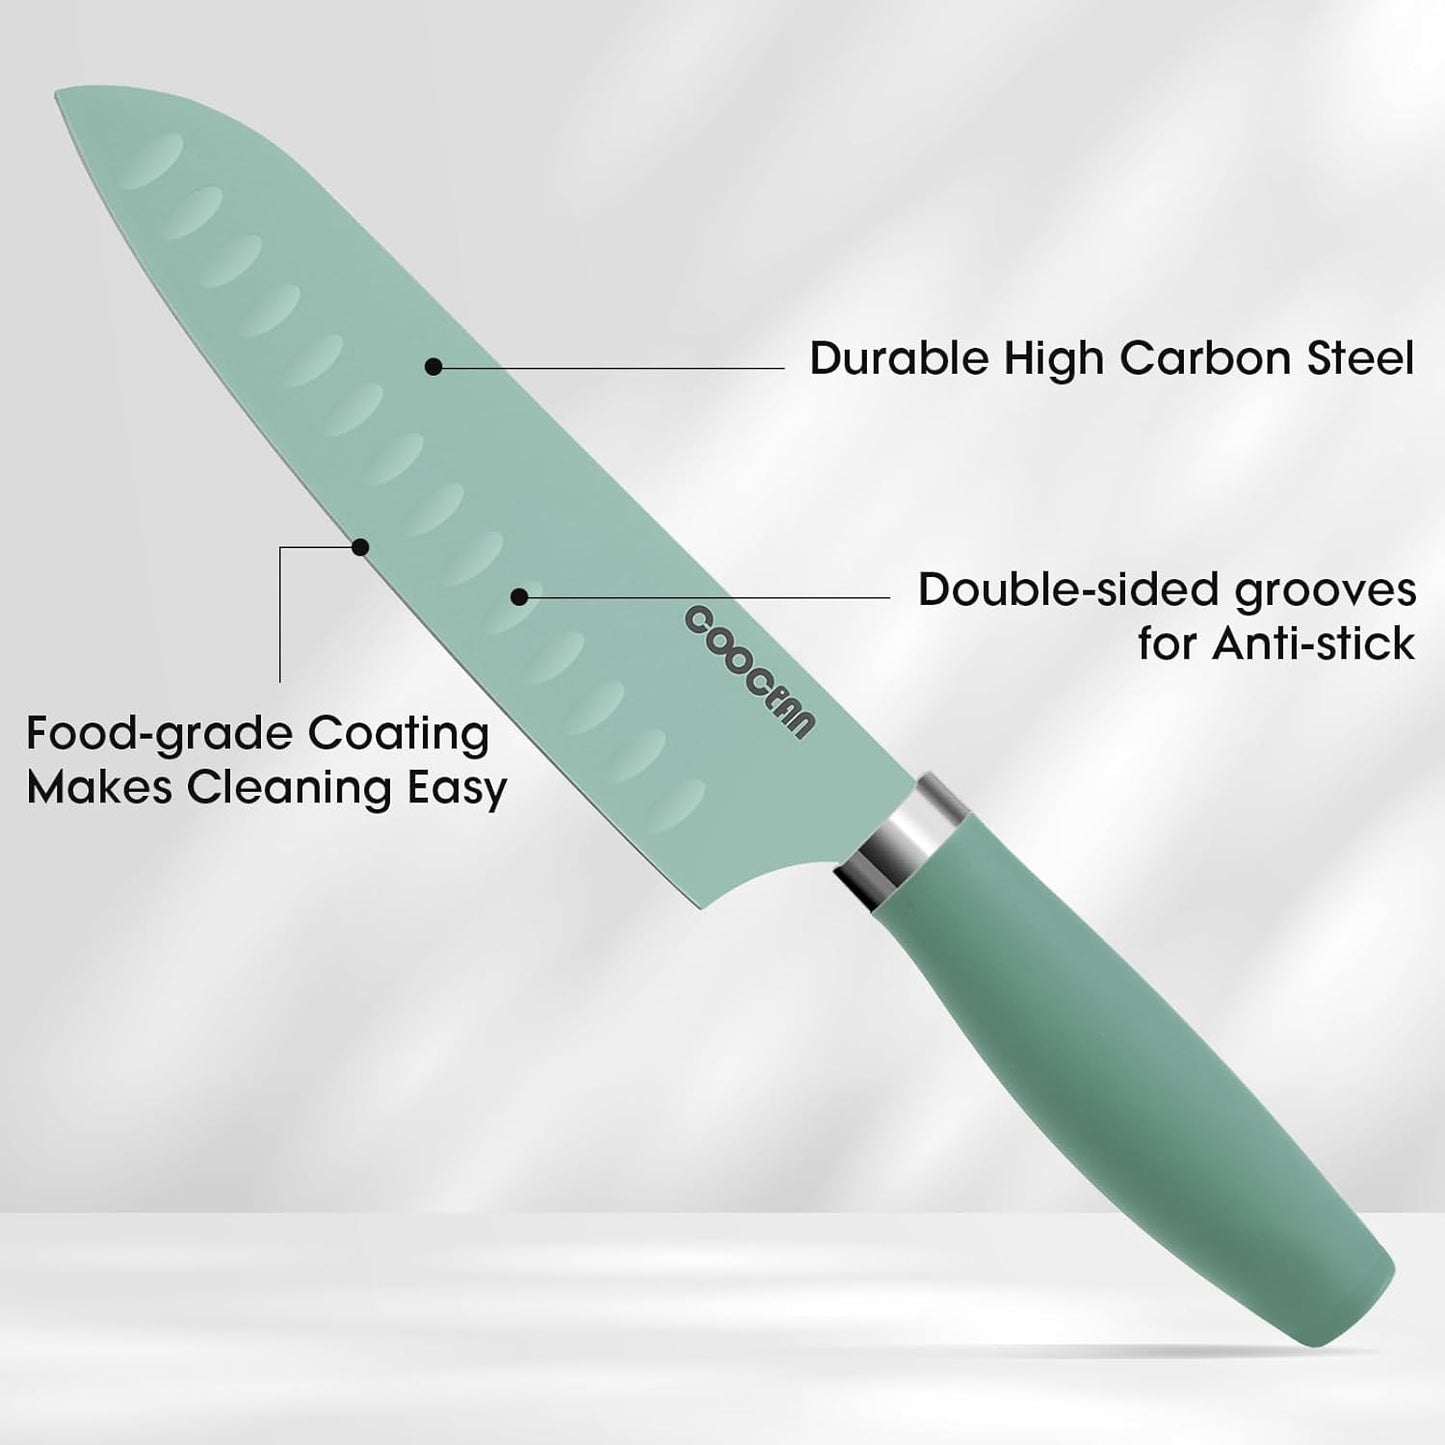 KD Santoku Chef Knife Stainless Steel with Gift Box & Sheath